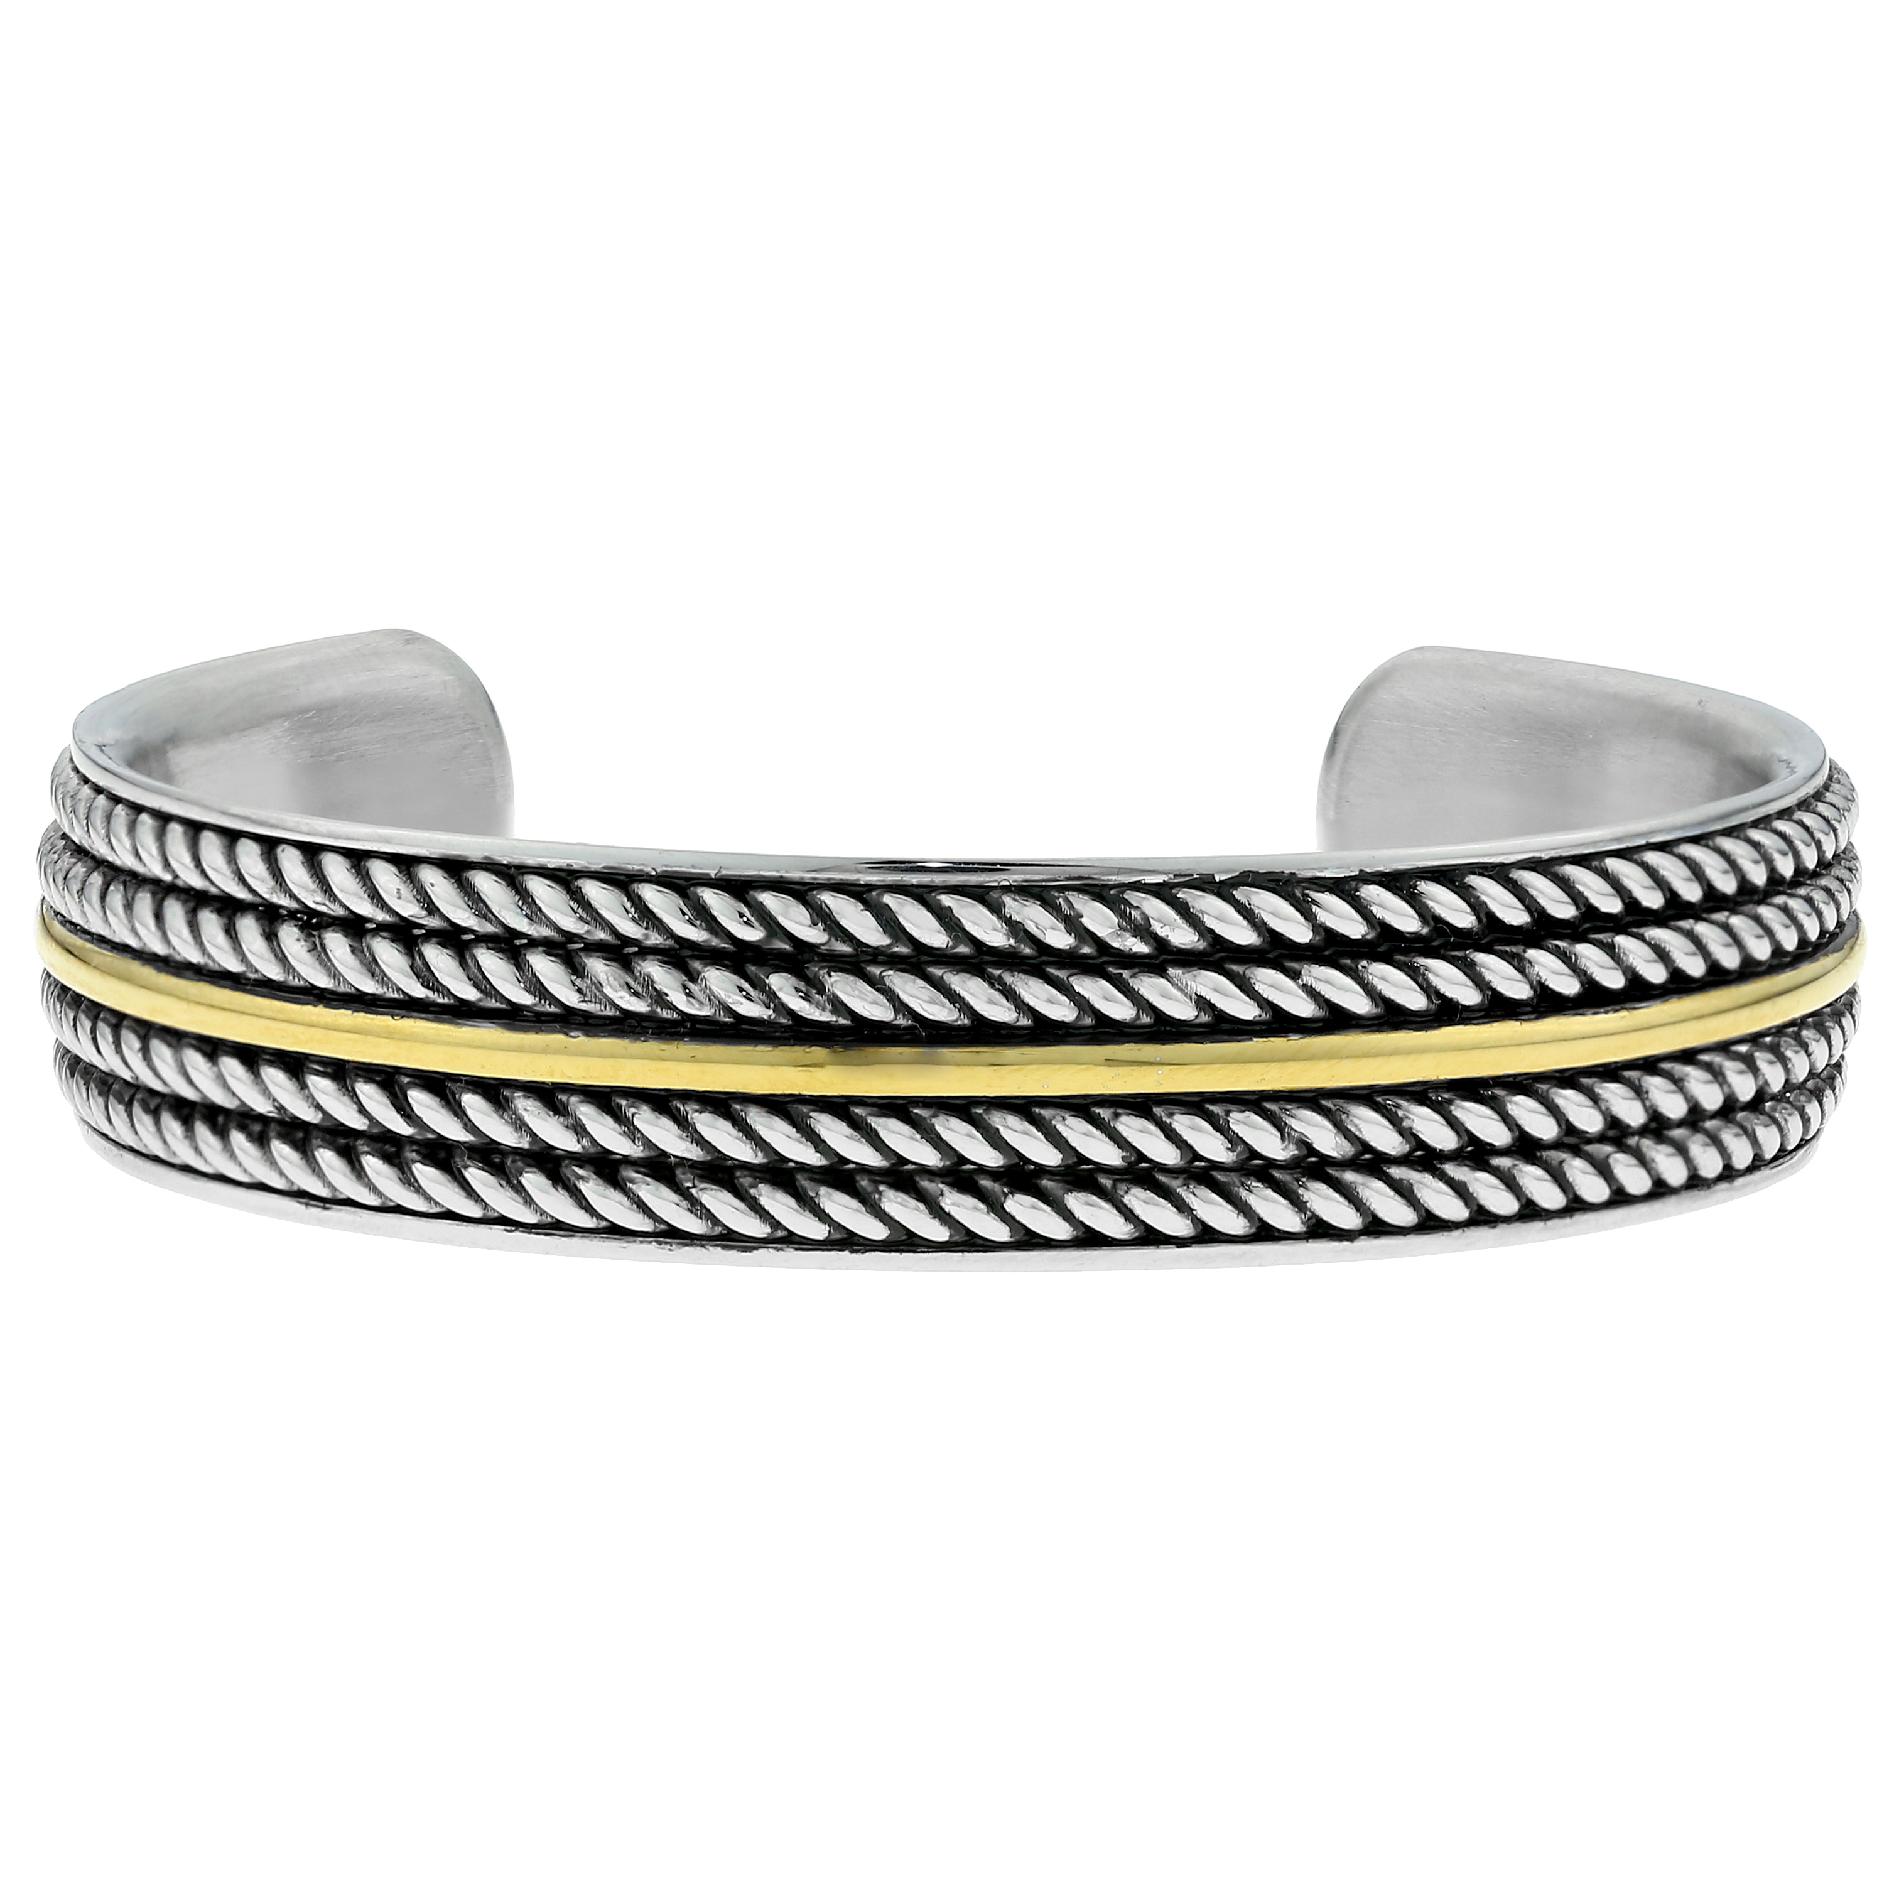 Stainless Steel Ribbed Design Cuff Bangle with Gold IP Accent